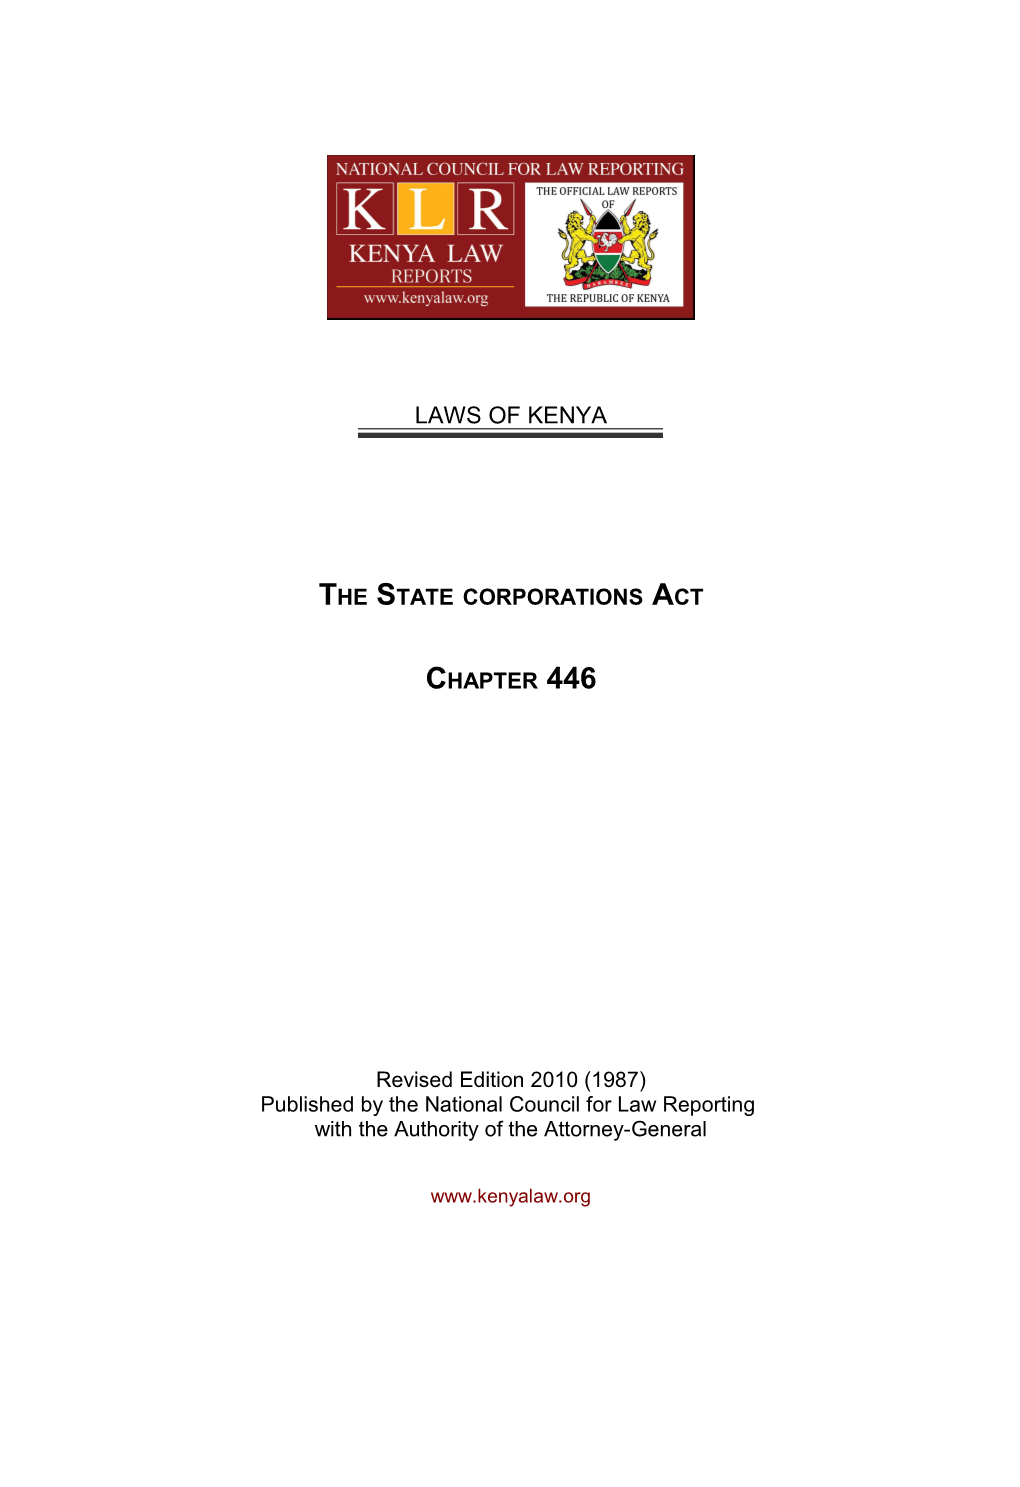 The State Corporations Act